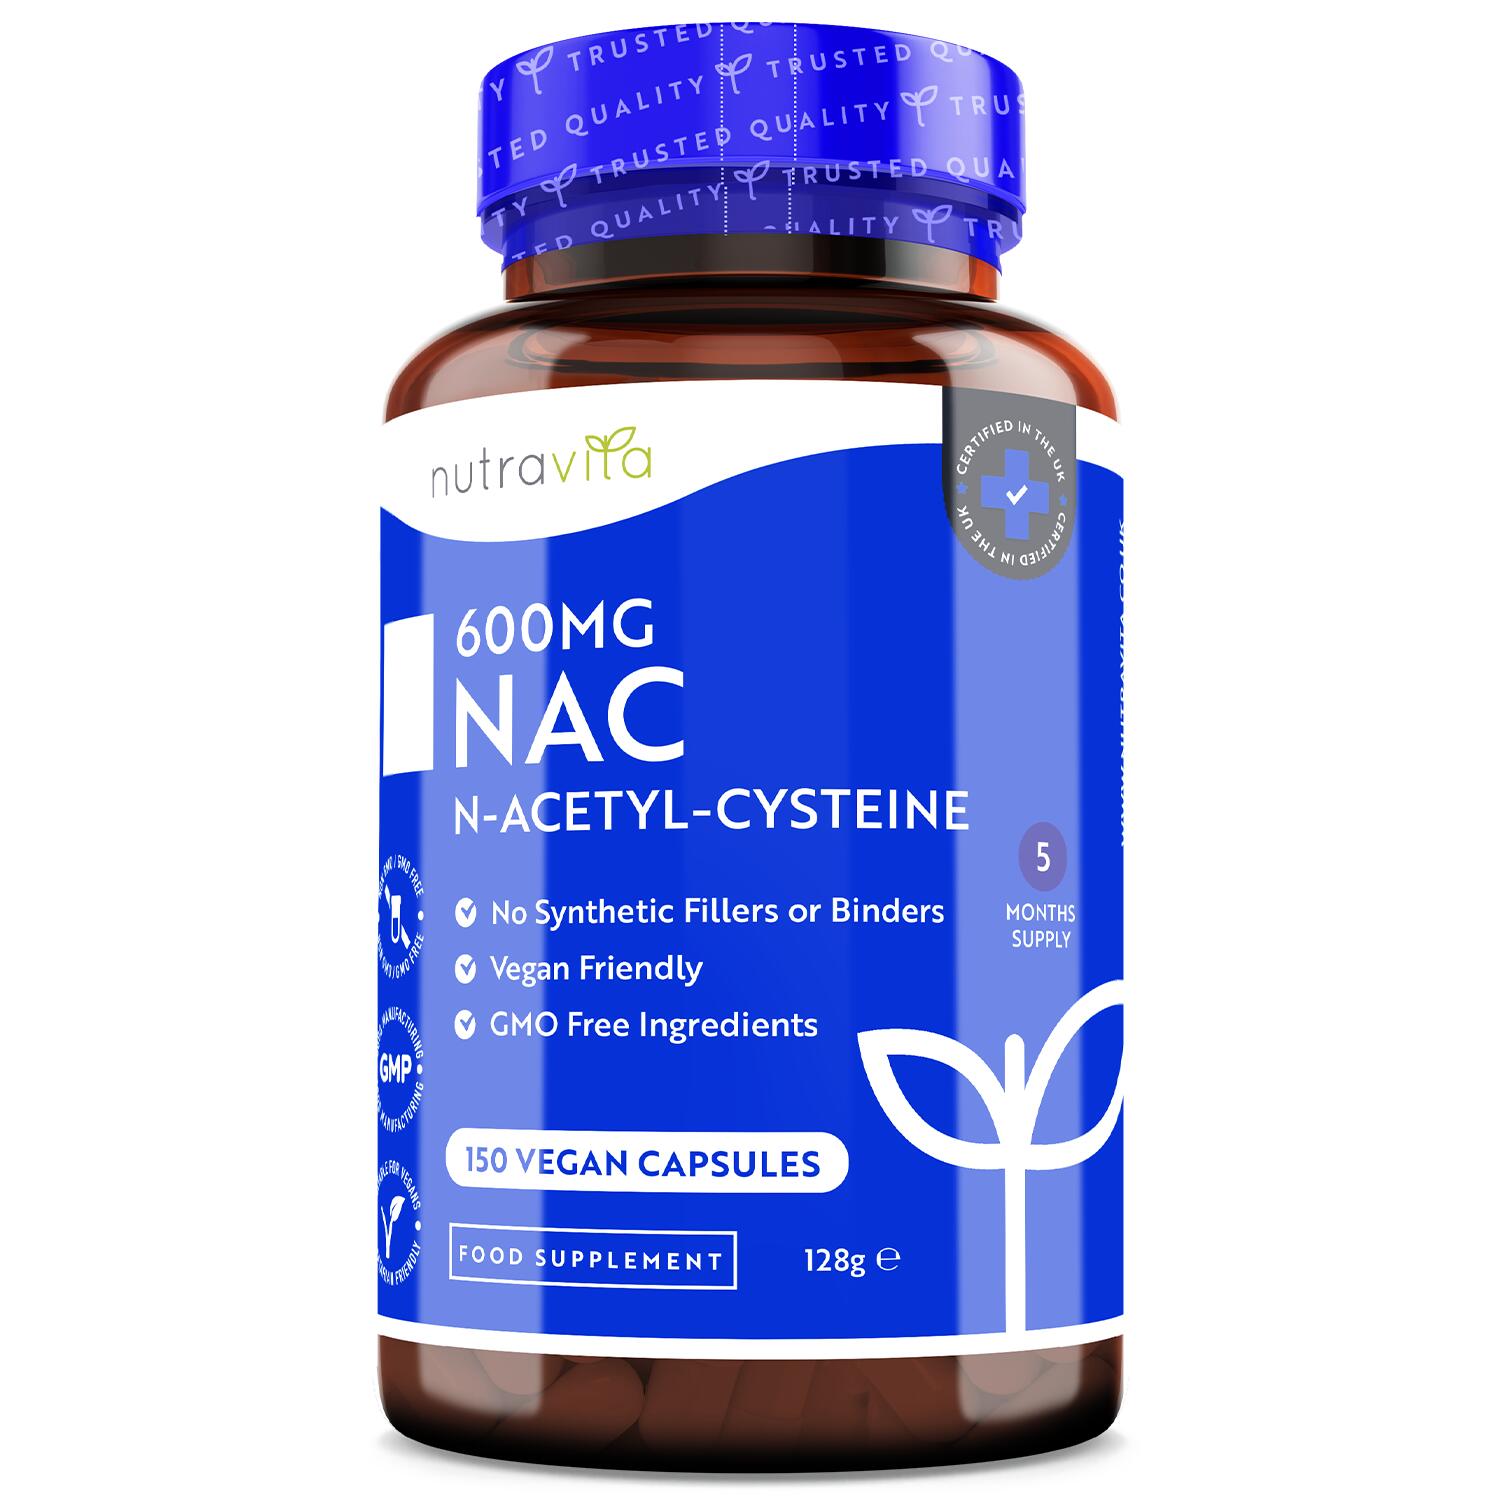 NUTRAVITA NAC is a stable form of amino acid, L-Cysteine which is in high-protein foods